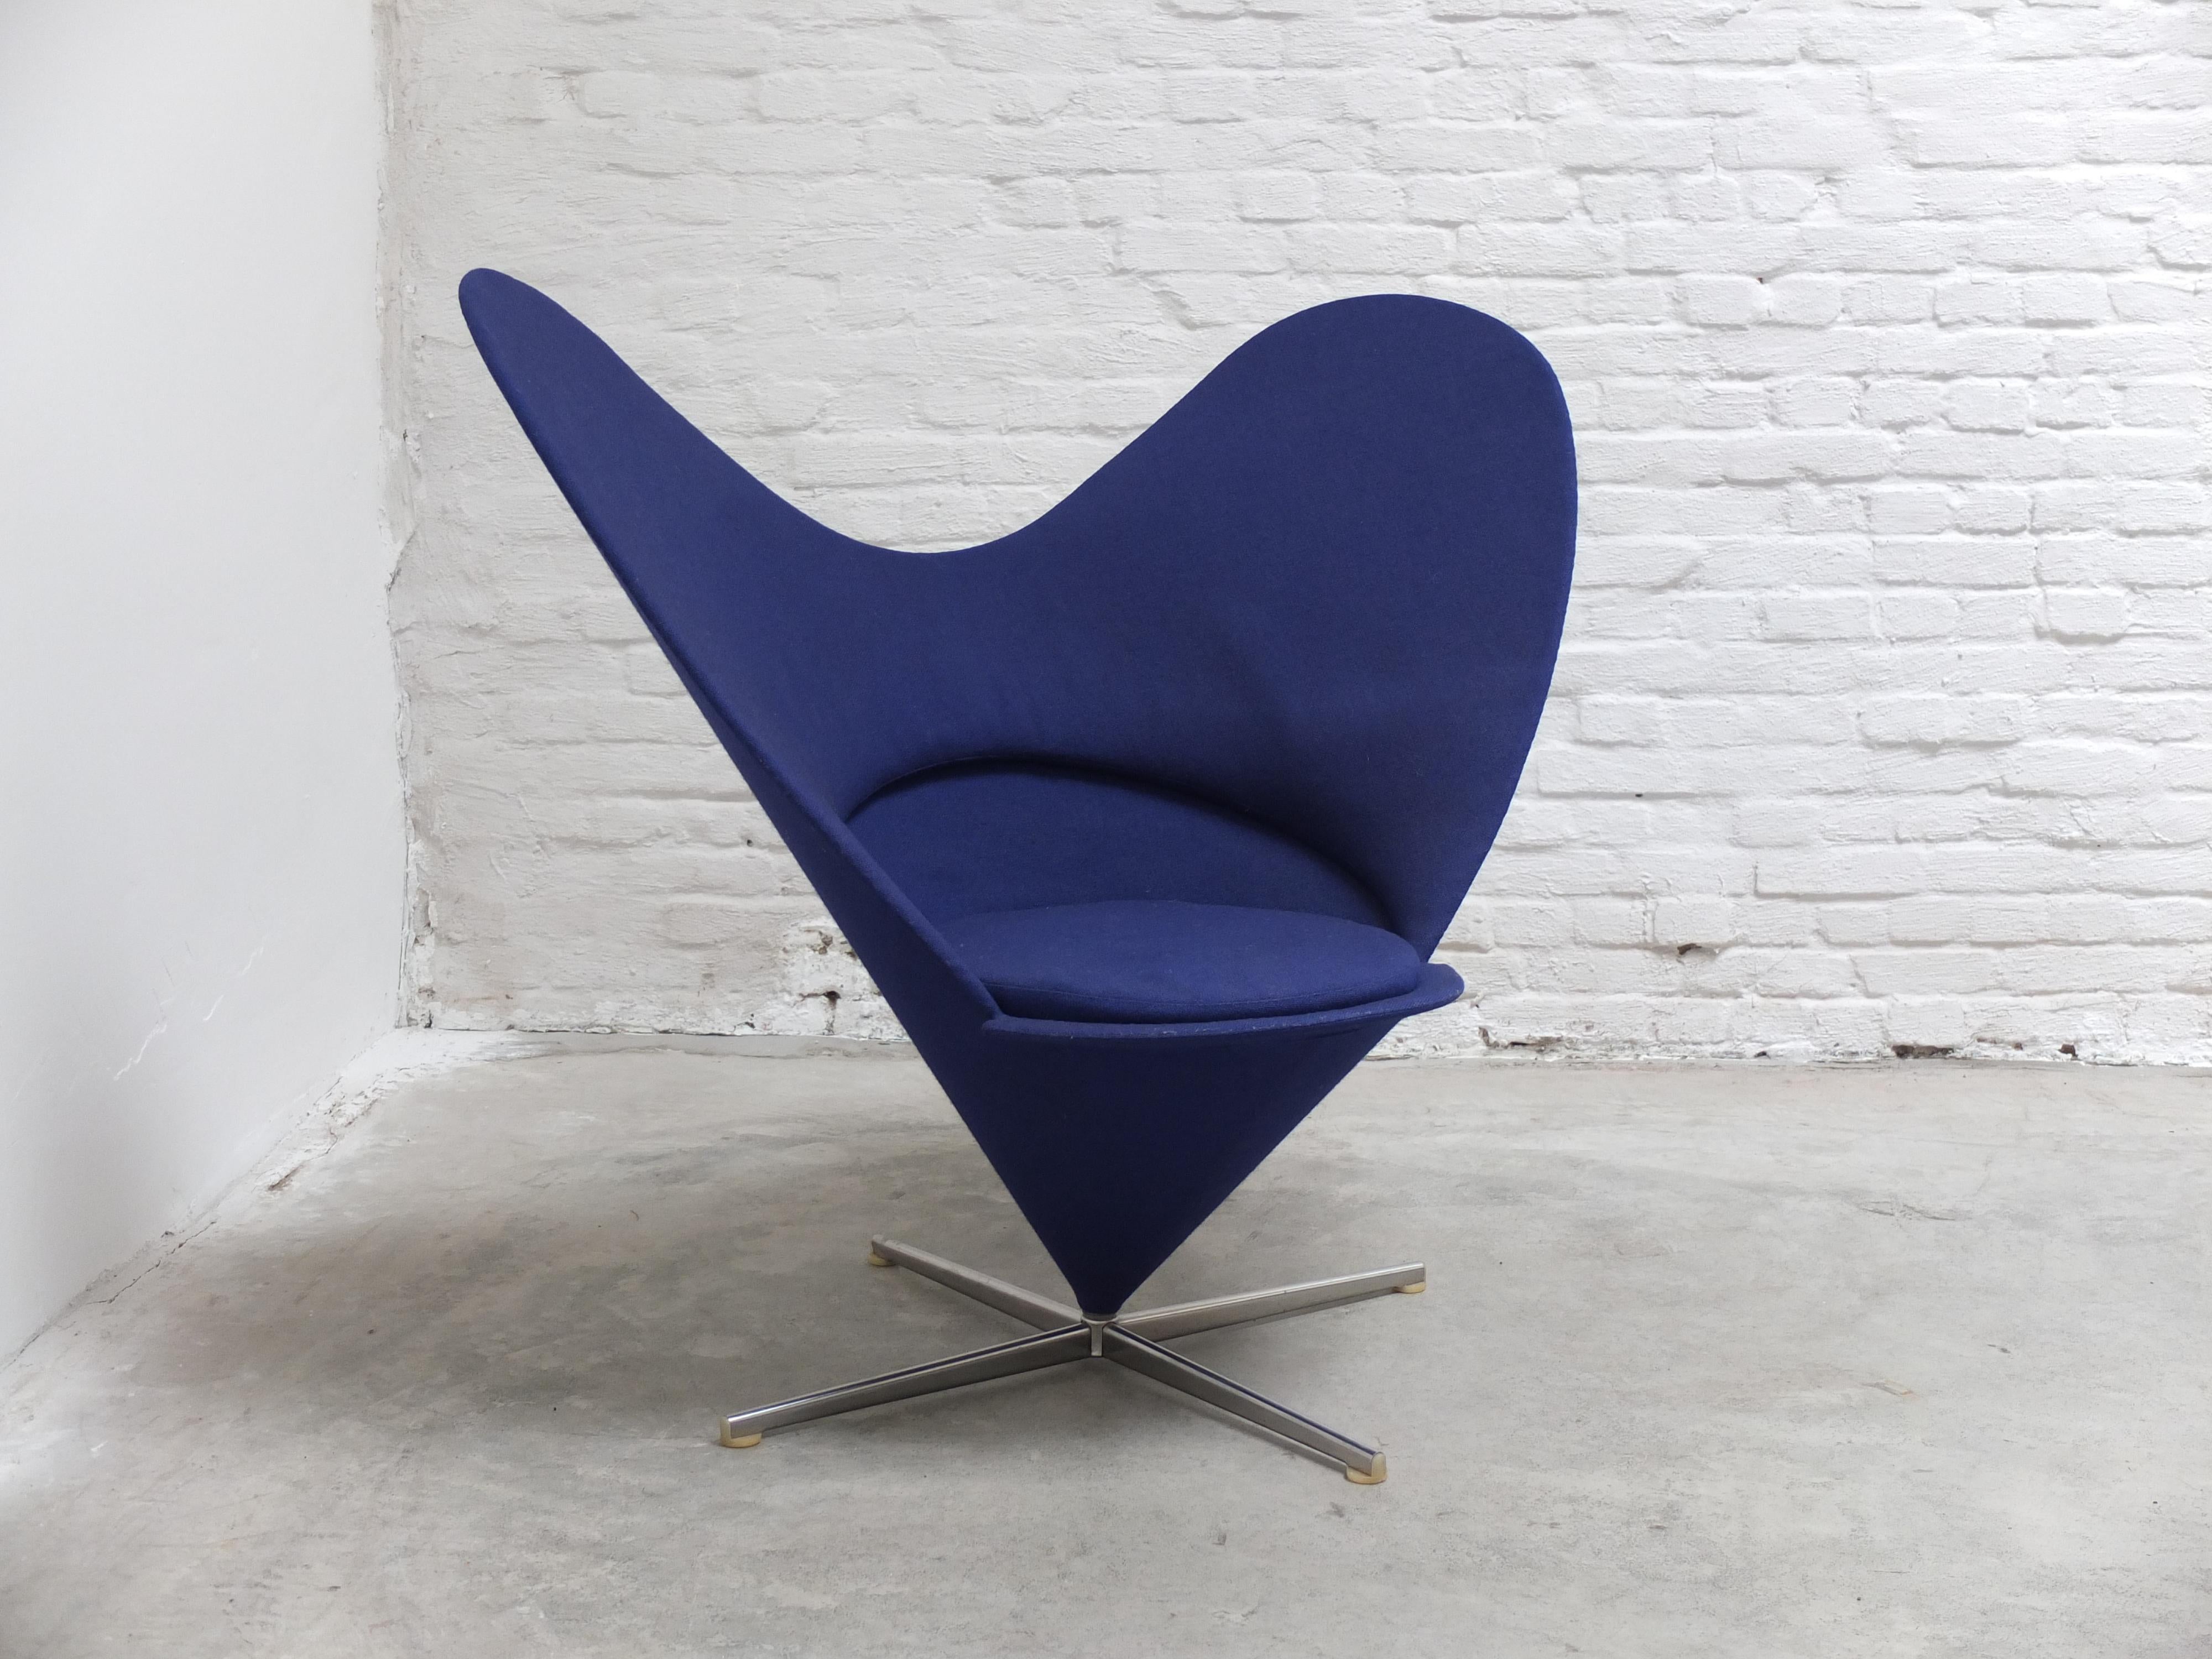 Scandinavian Modern Iconic 'Heart Cone' Chair by Verner Panton for Plus Linje, 1958 For Sale